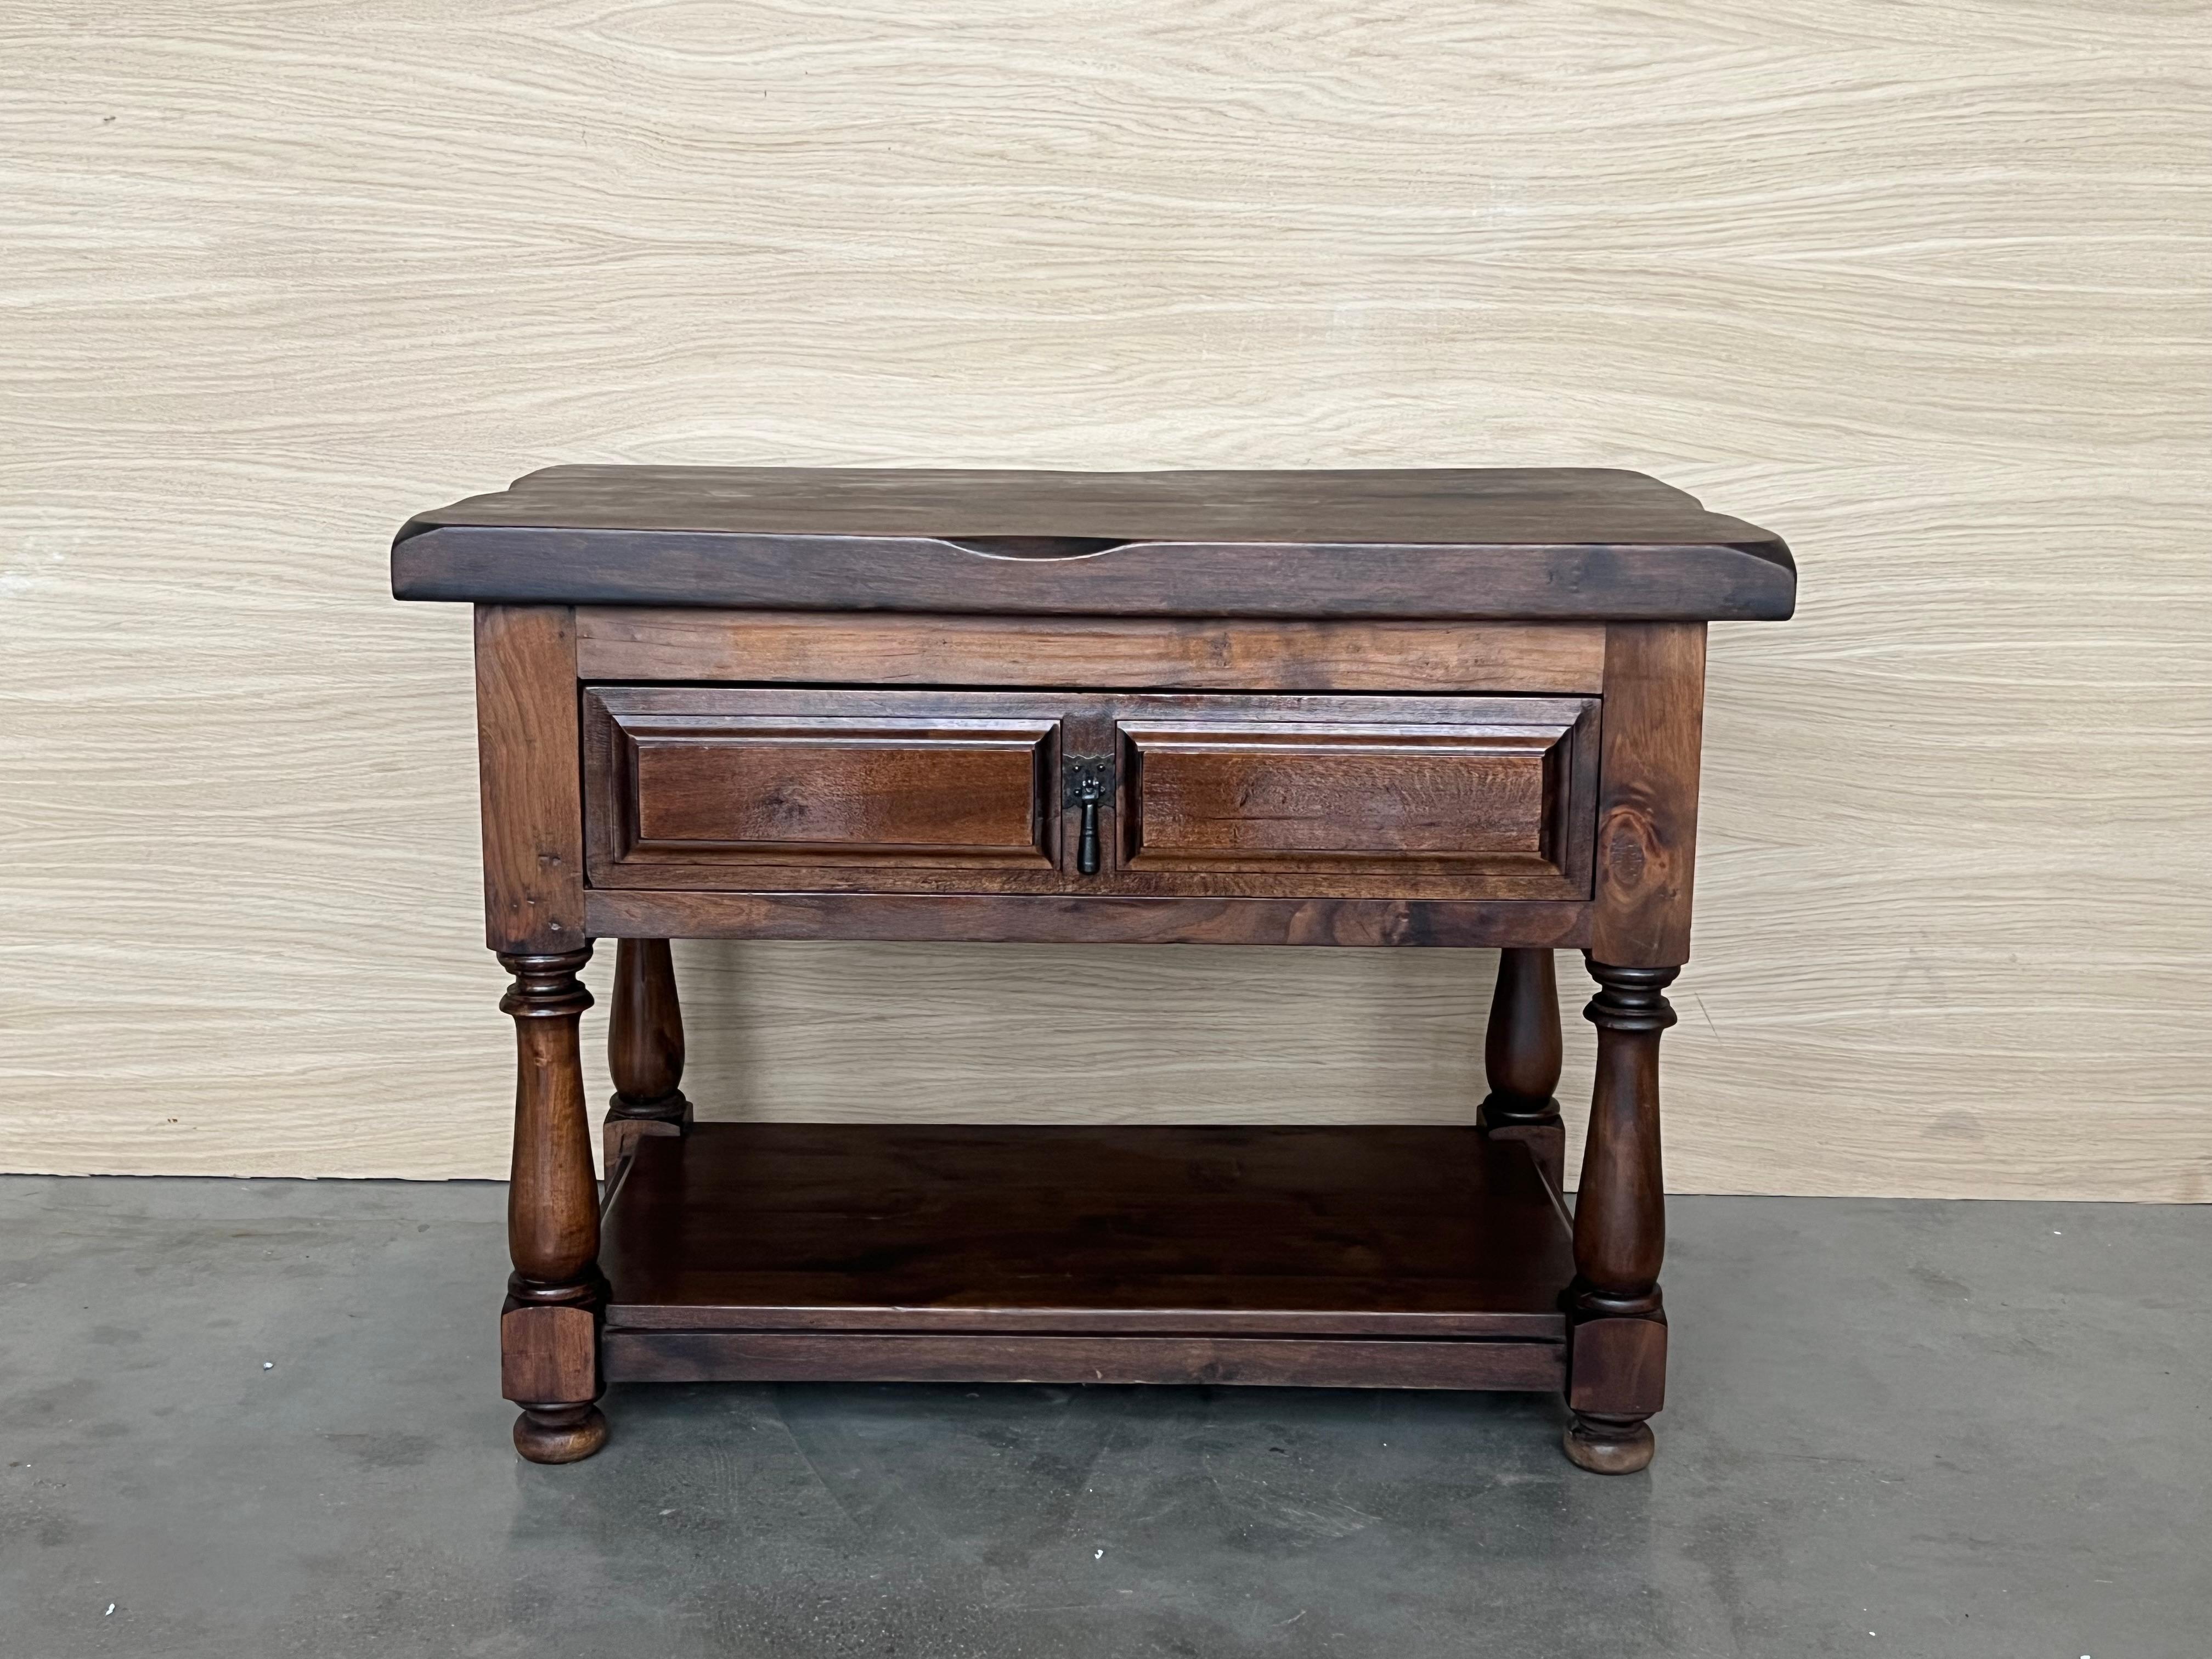 20th century Pair of Spanish nightstands or large low tables with one drawer , iron hardware and low shelve. The table has beautiful carved drawers with original iron pull and really nice patina.
 Beautiful tables that you can use like a nightstands